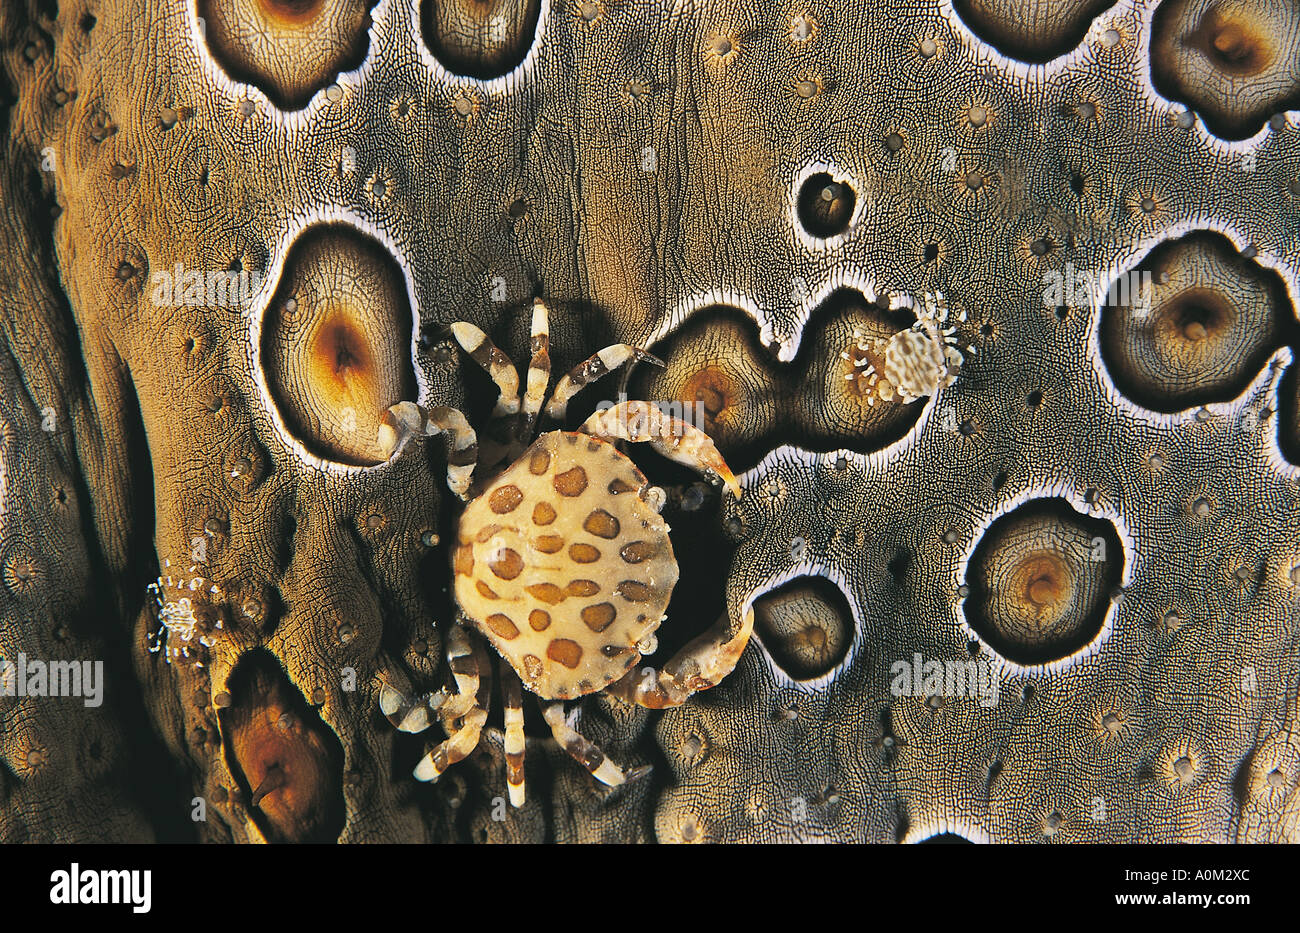 Commensal crabs on a leopard sea cucumber, Sulawesi Indonesia. Stock Photo